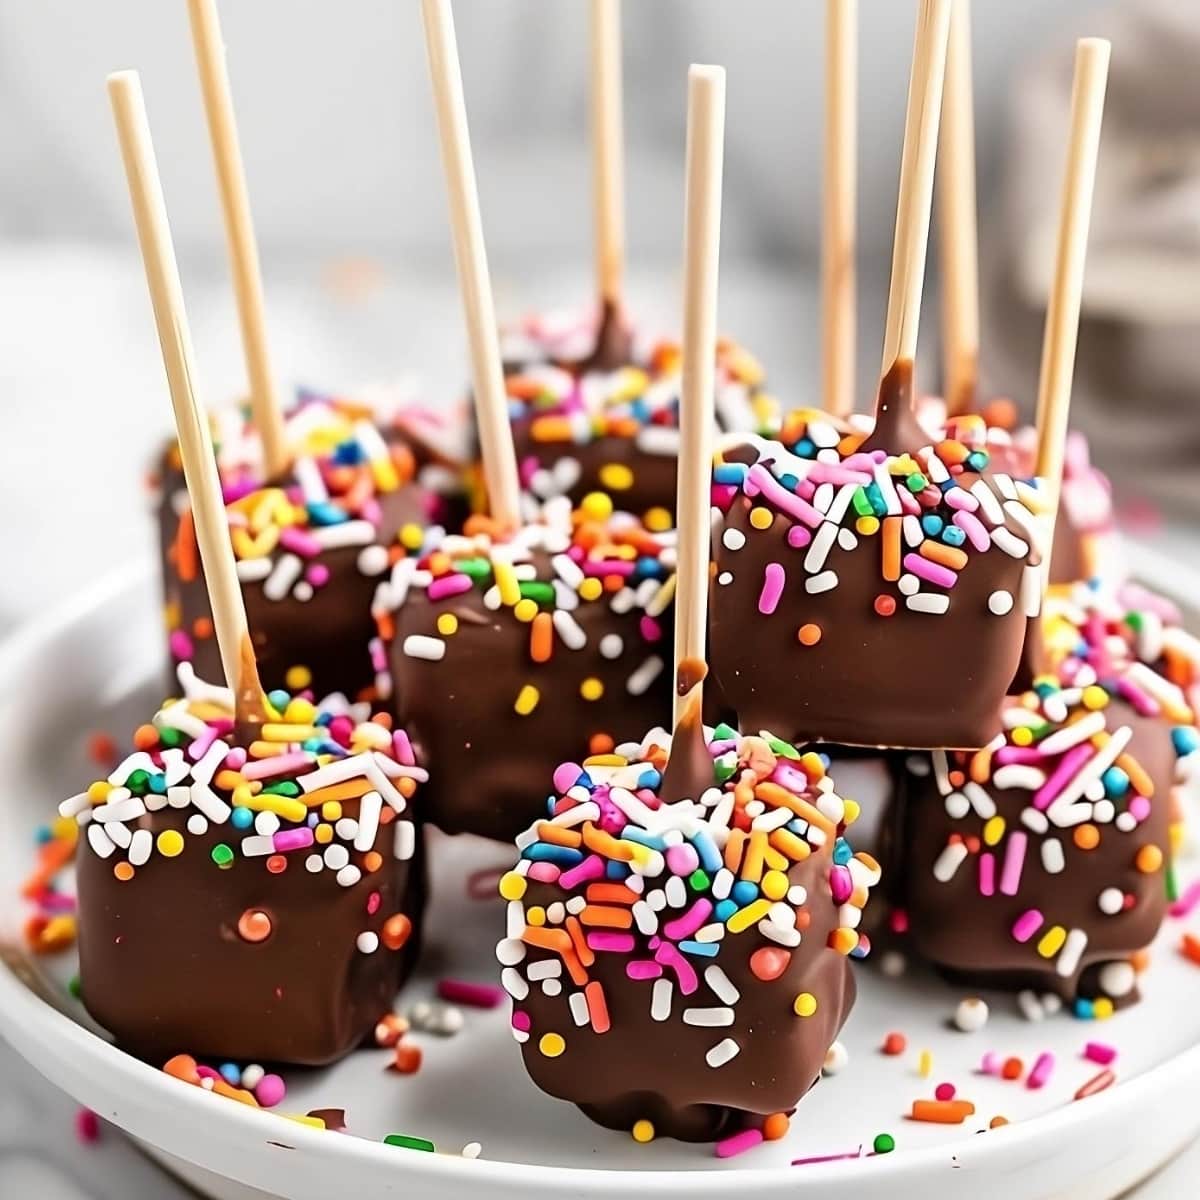 Chocolate covered marshmallows on sticks covered with sprinkles.